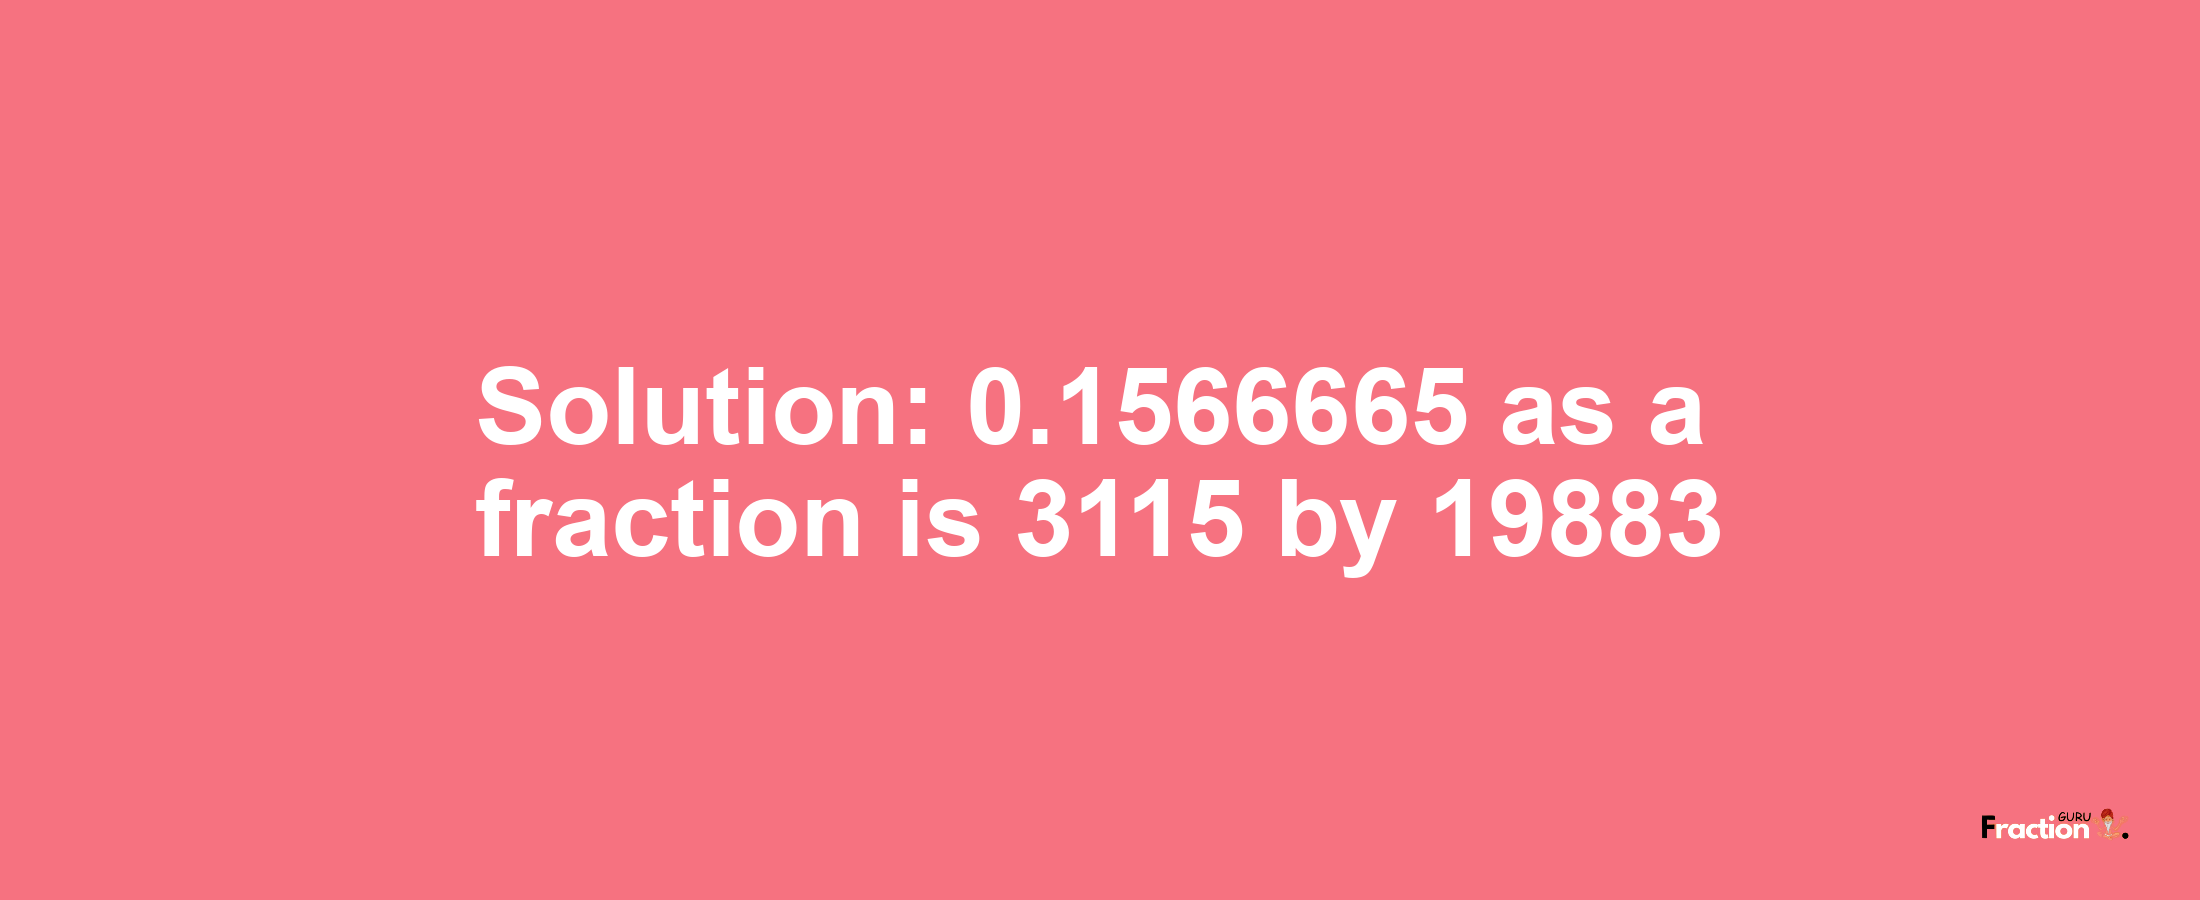 Solution:0.1566665 as a fraction is 3115/19883